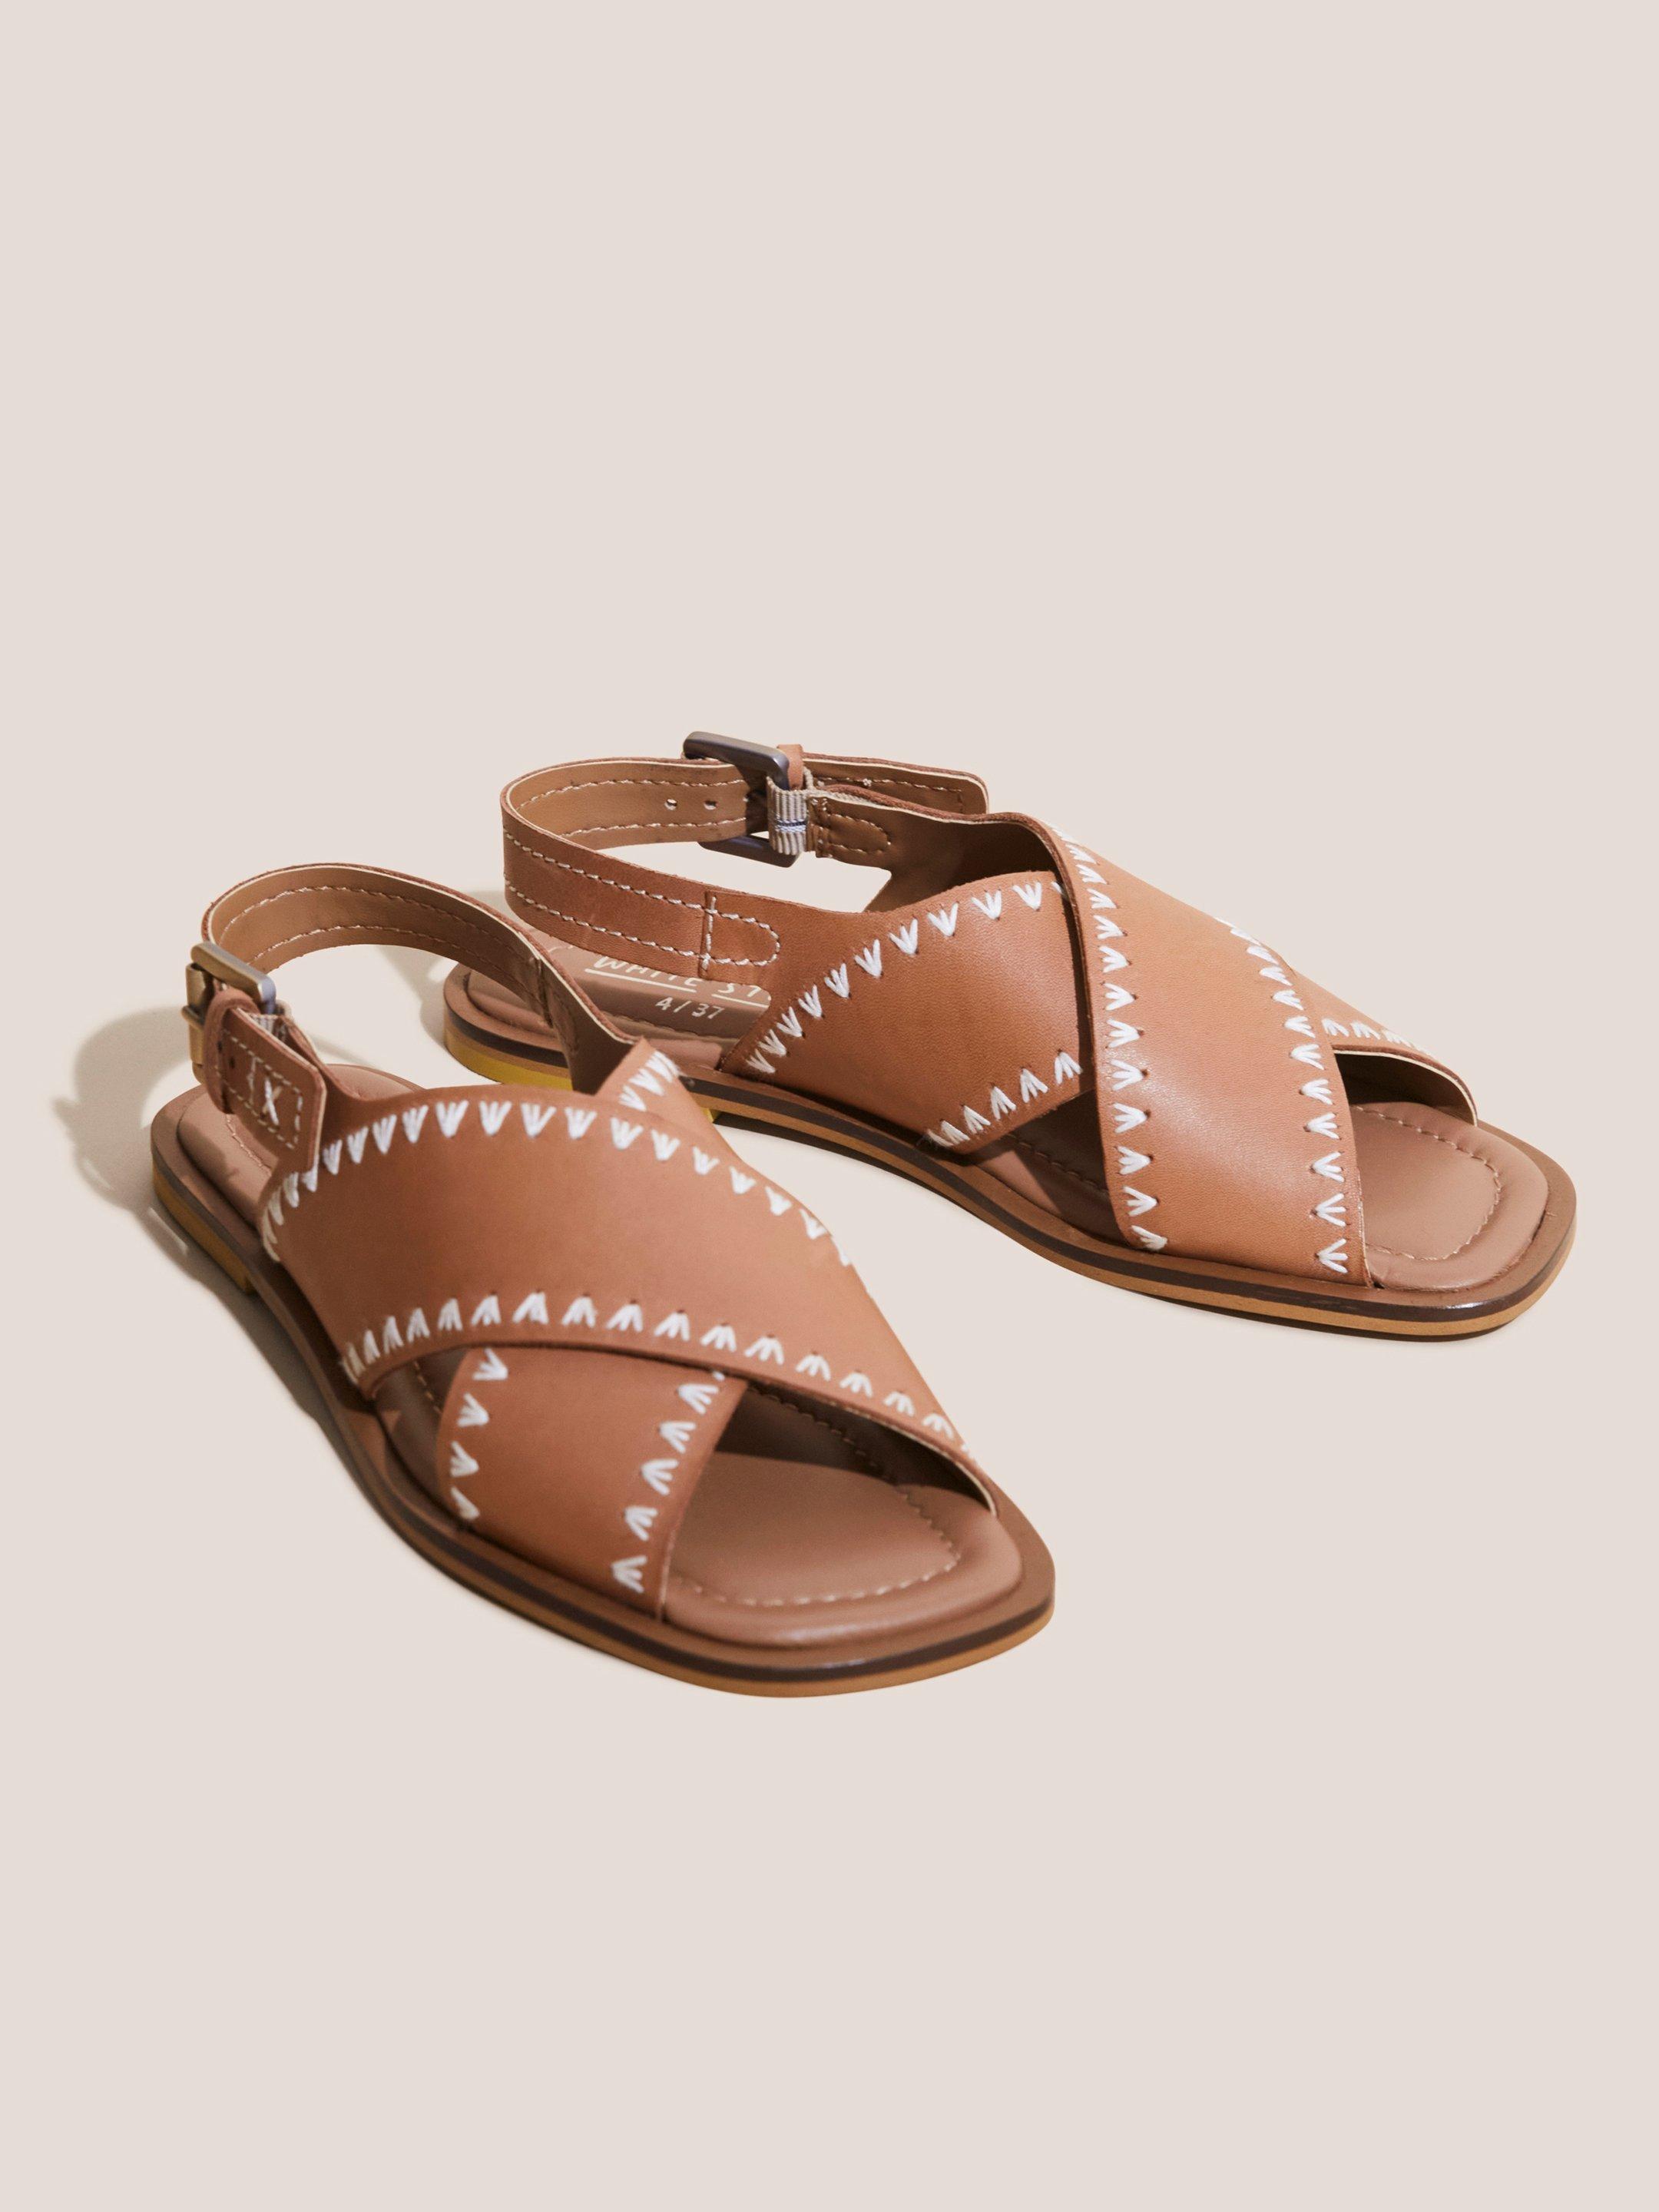 Craft Leather Sandal in MID TAN - FLAT FRONT